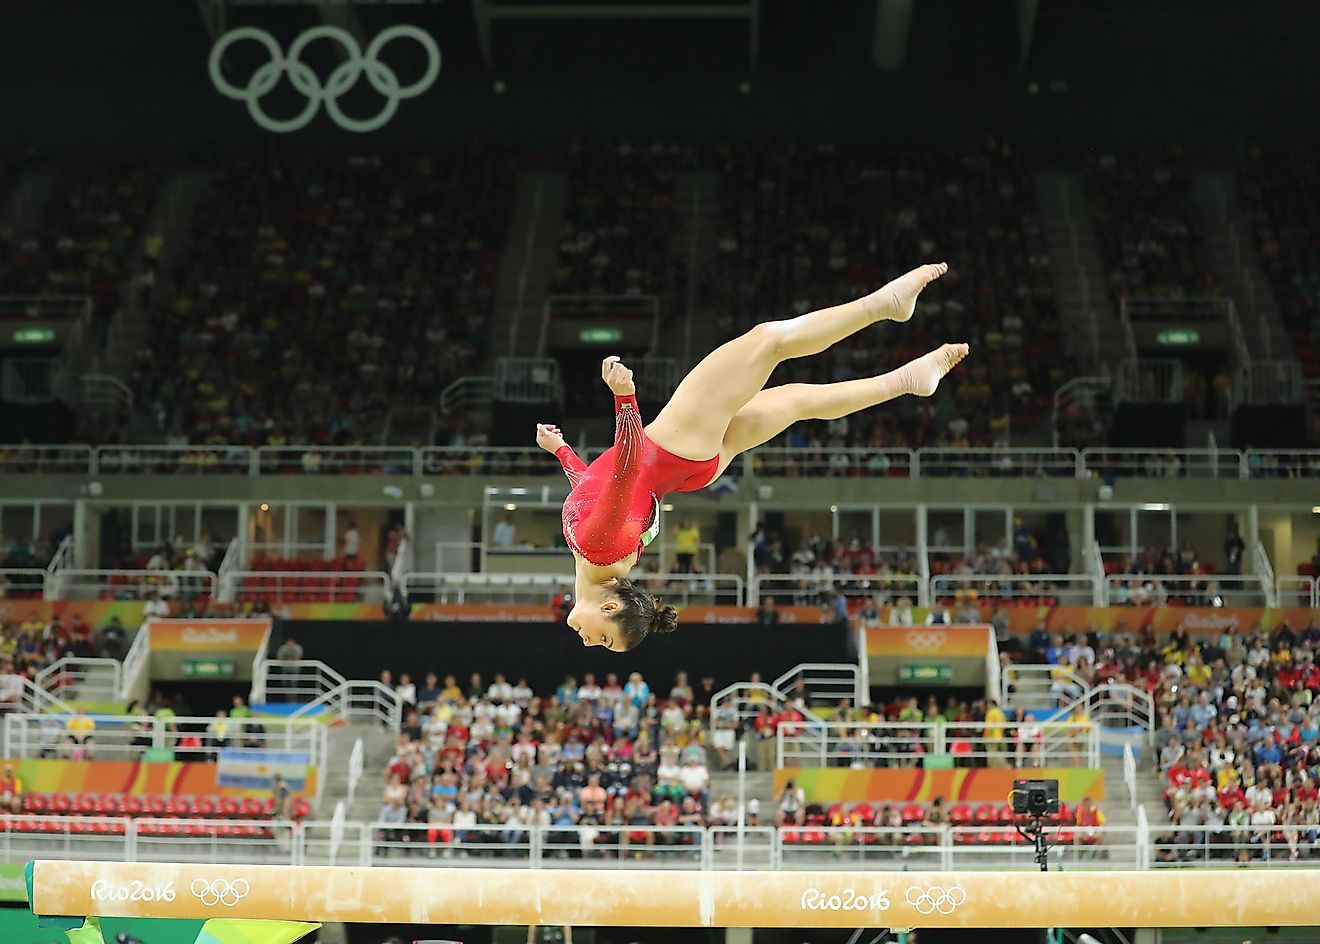 Gymnastics is one of the most watched Summer Olympic sports. Editorial credit: Leonard Zhukovsky / Shutterstock.com.